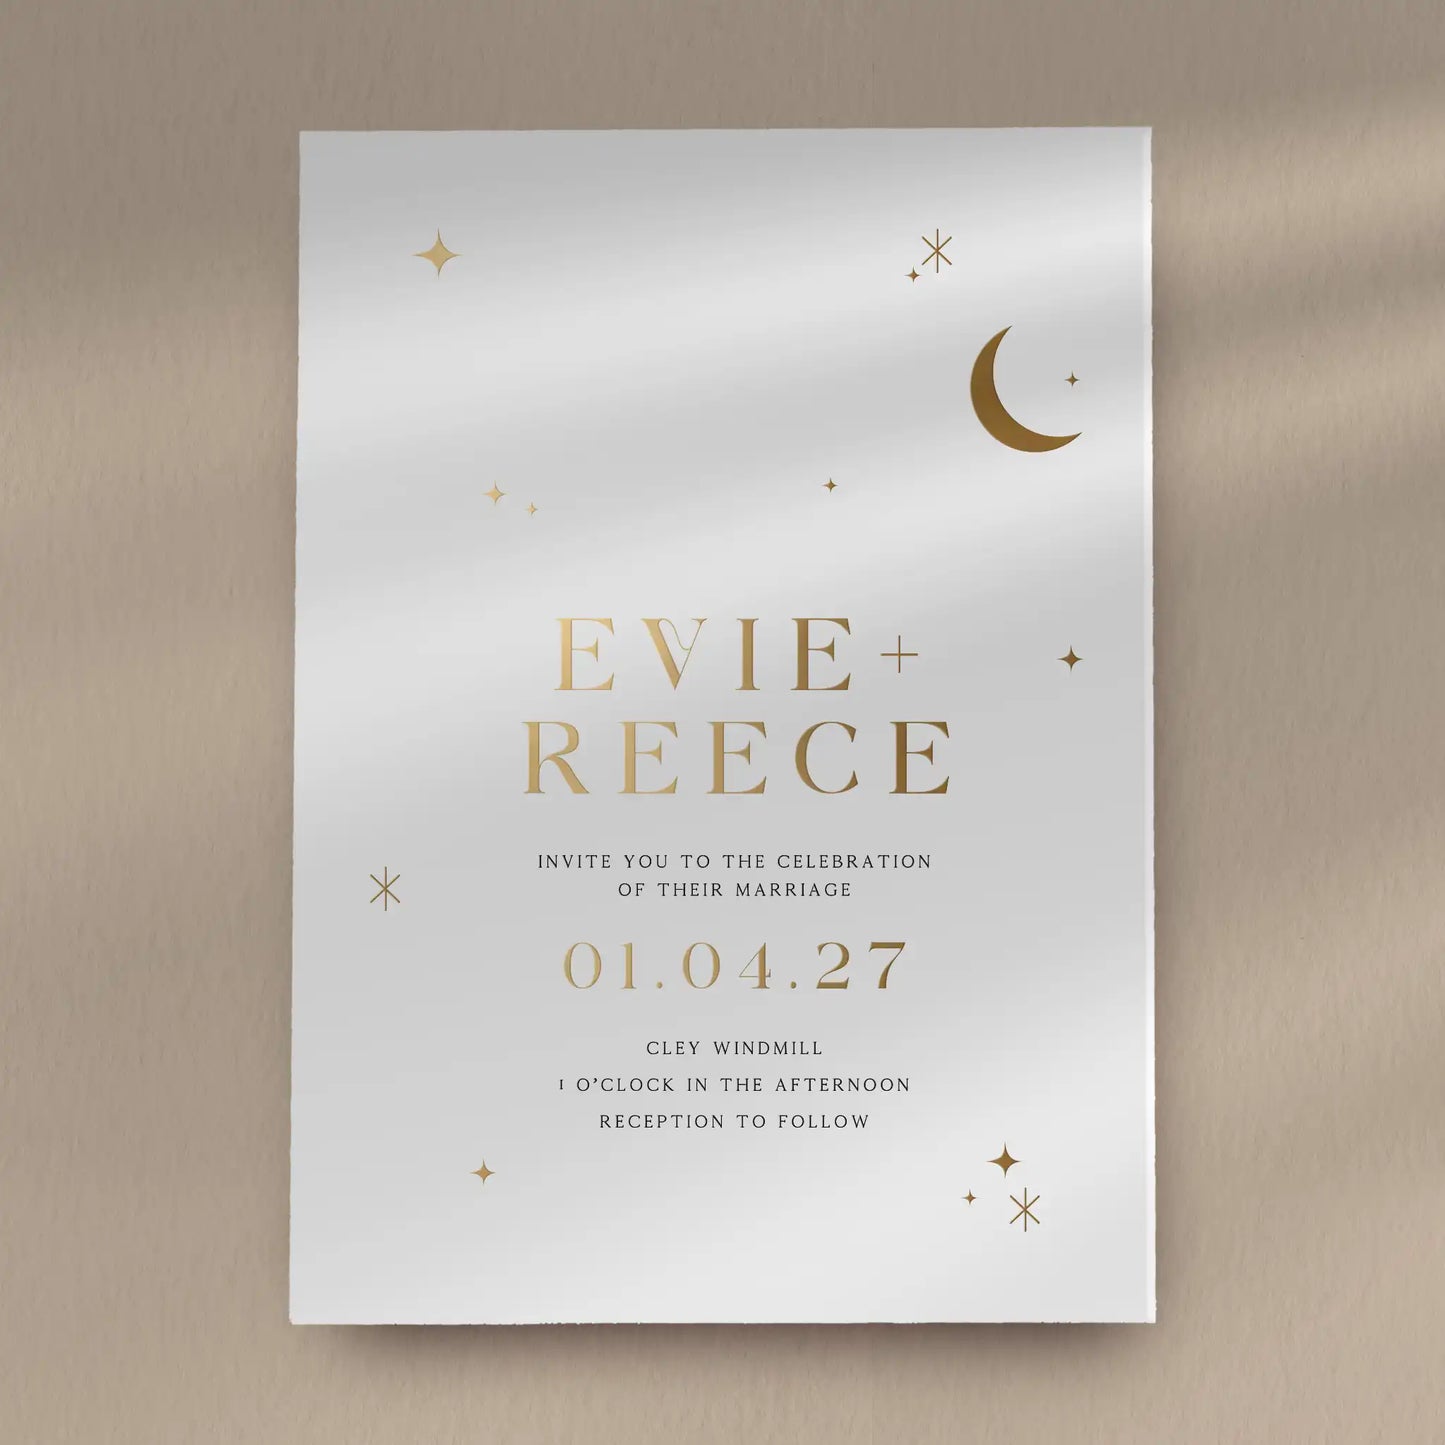 Day Invitation Sample  Ivy and Gold Wedding Stationery Evie  